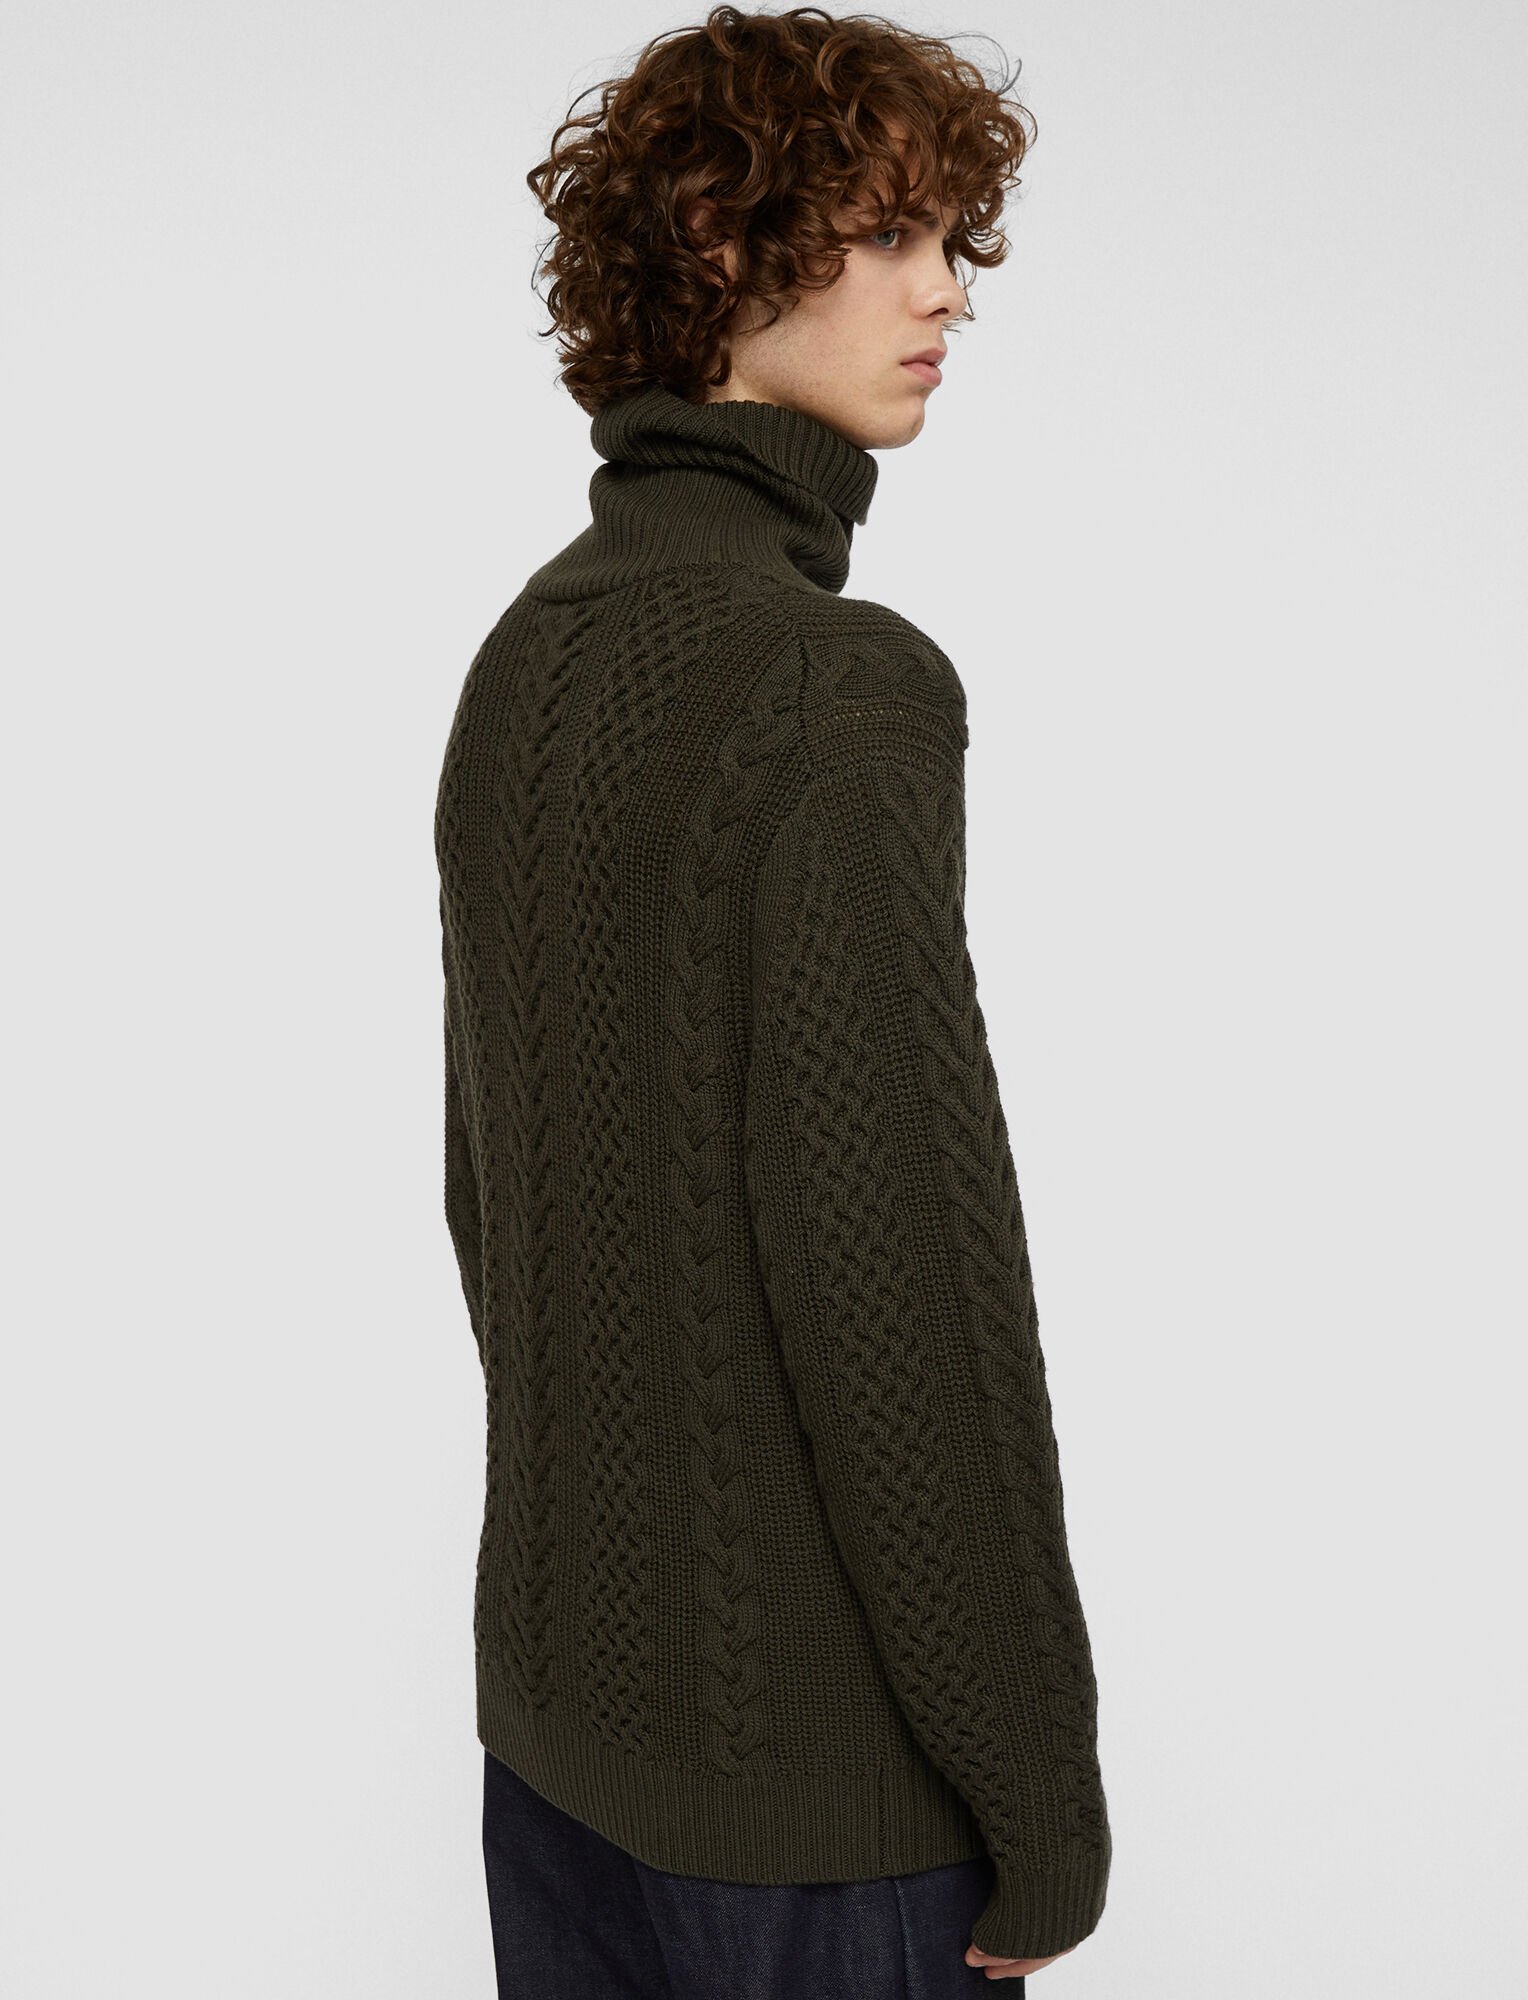 Joseph, Worsted Cable Knit High Neck Jumper, in Cypress